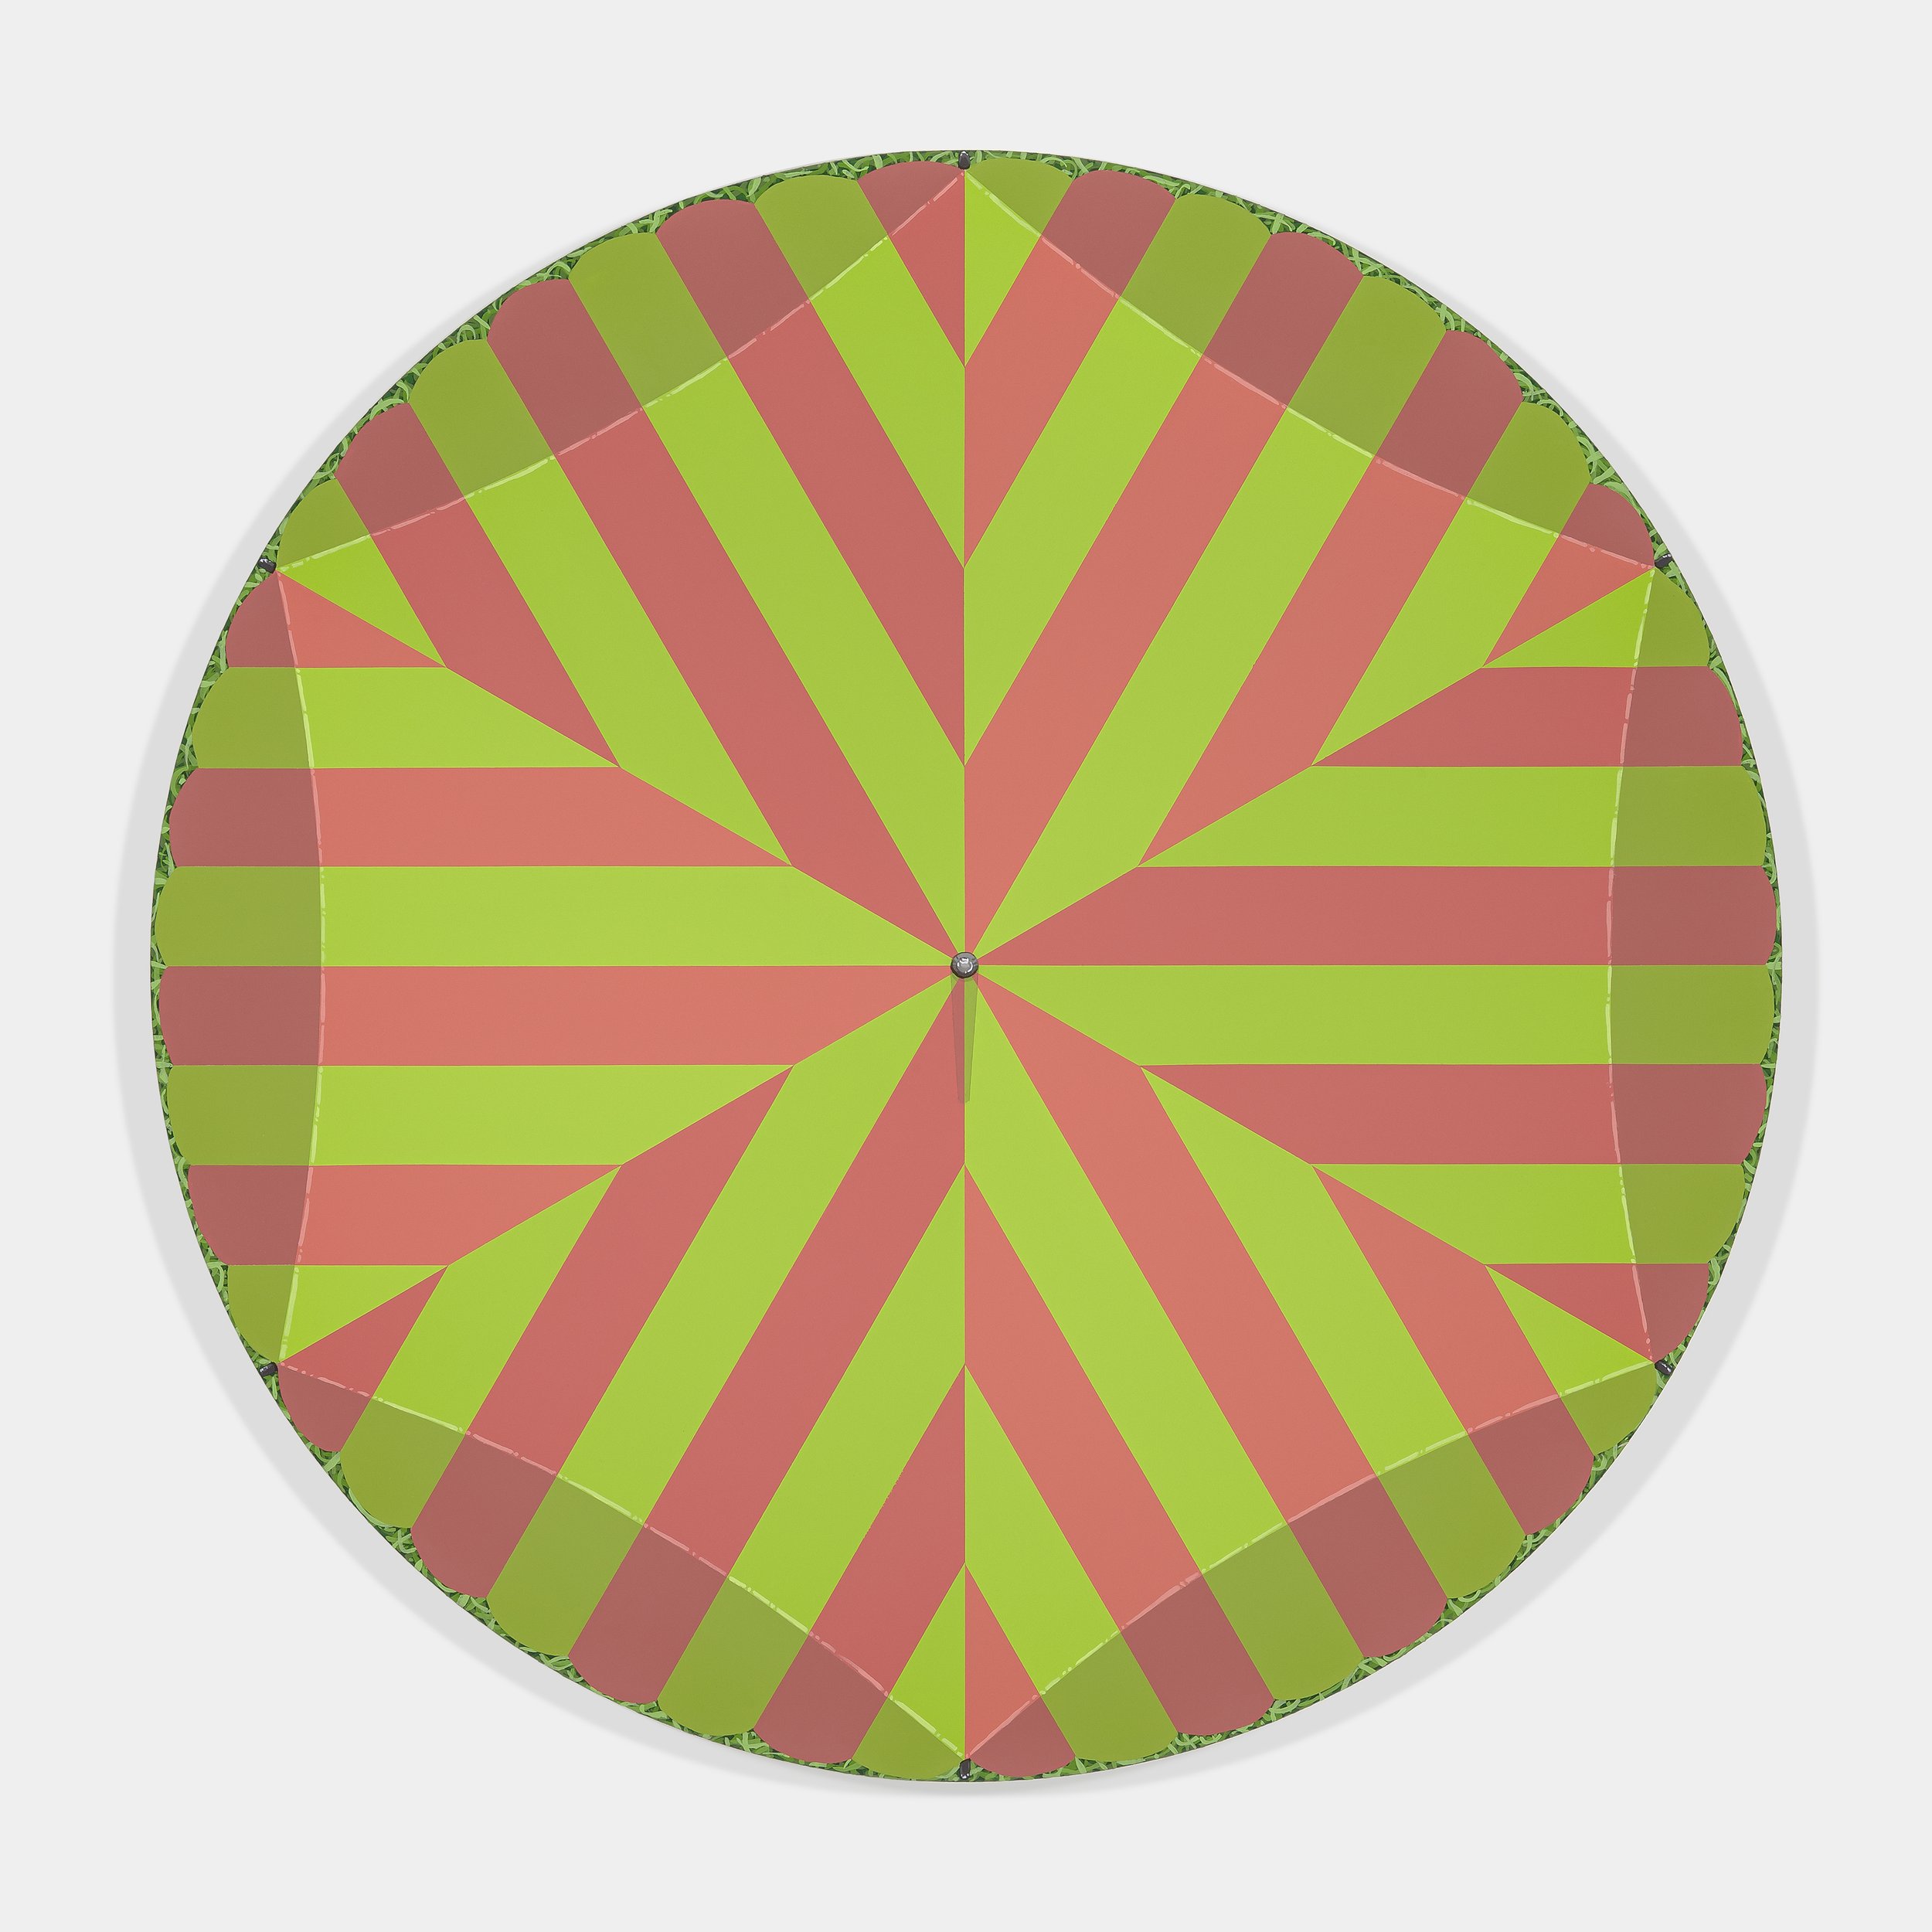 Parasol (Red and Green)